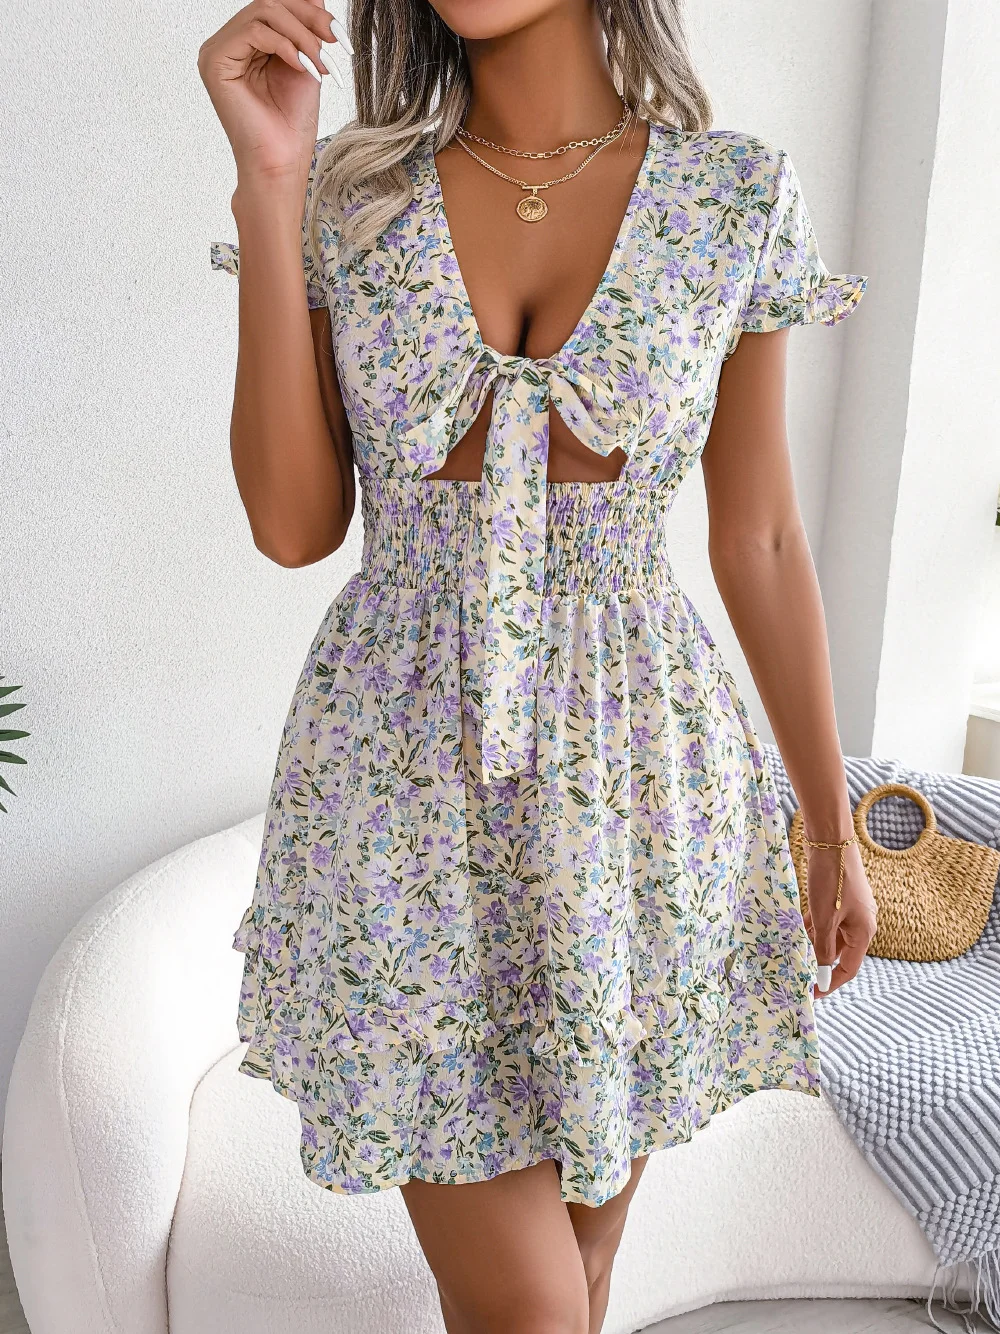 Elegant Floral Print Dress For Women Summer Dresses New V-Neck Chic Hollow Lace-up Flared Sleeve Ruffle Mini Dress